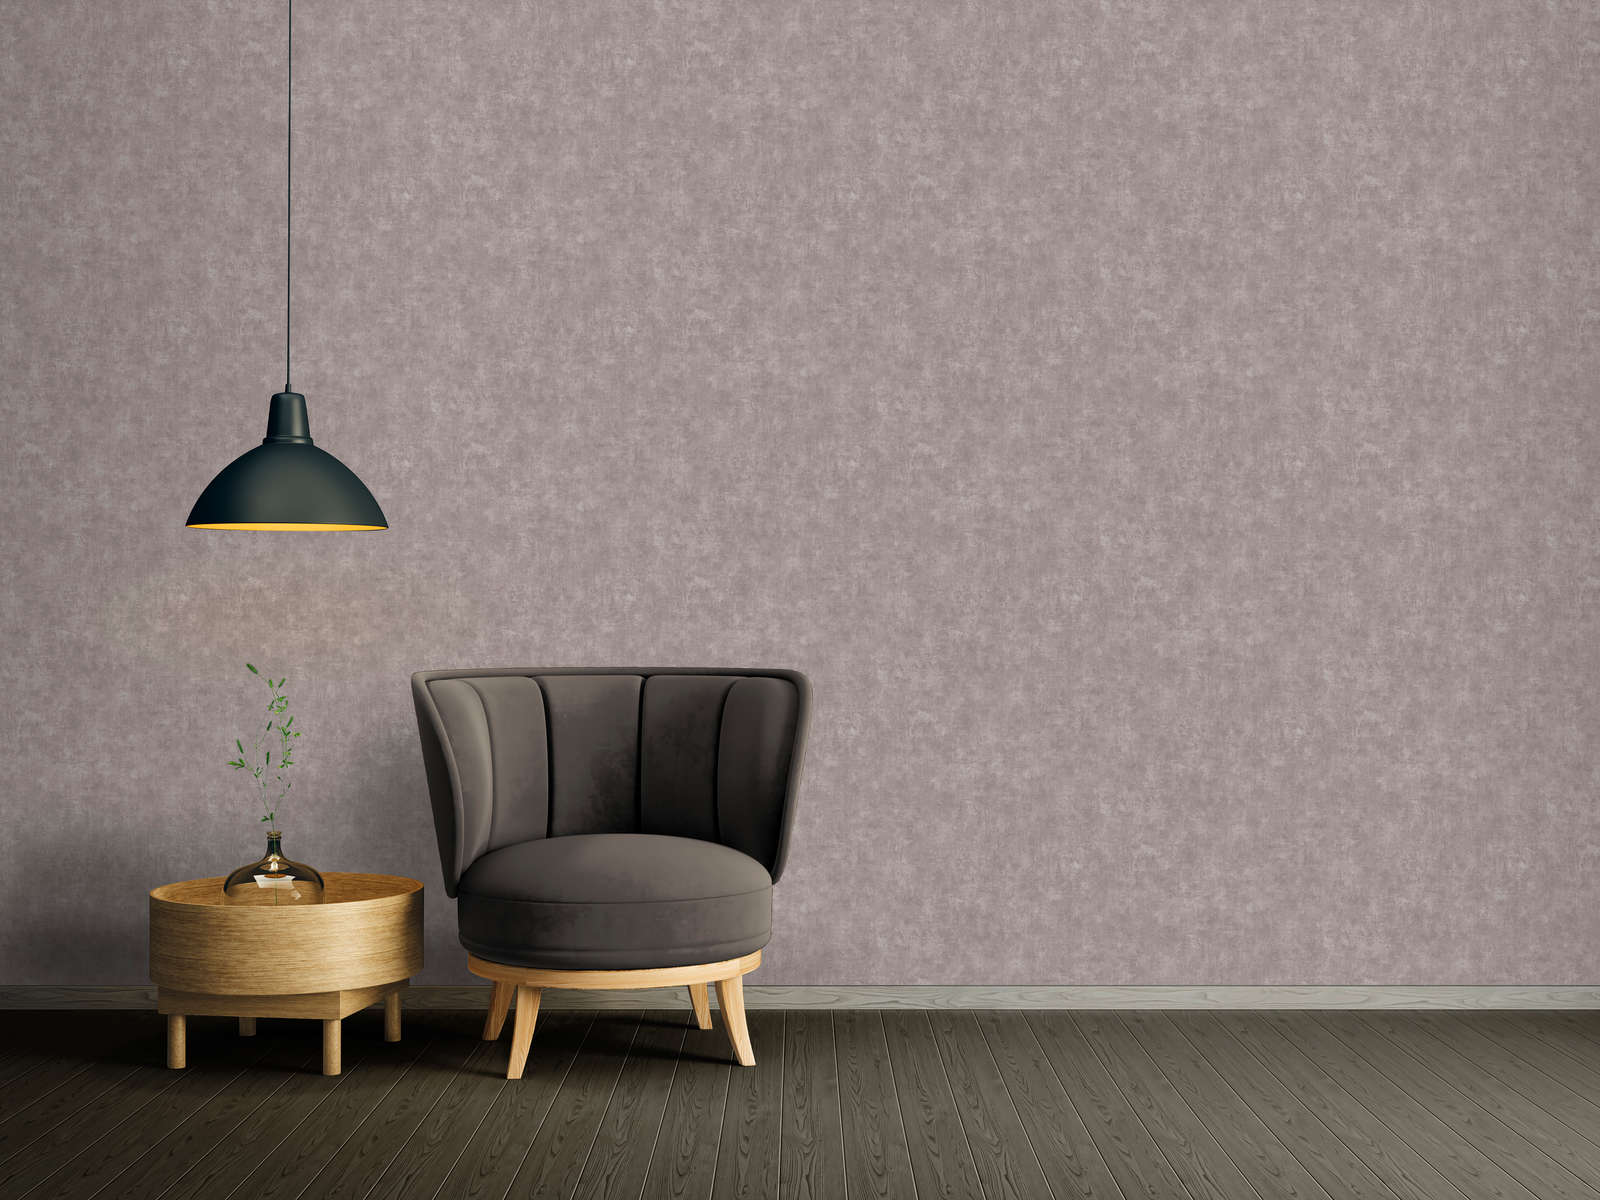             Non-woven wallpaper plains with concrete look and structure - grey
        